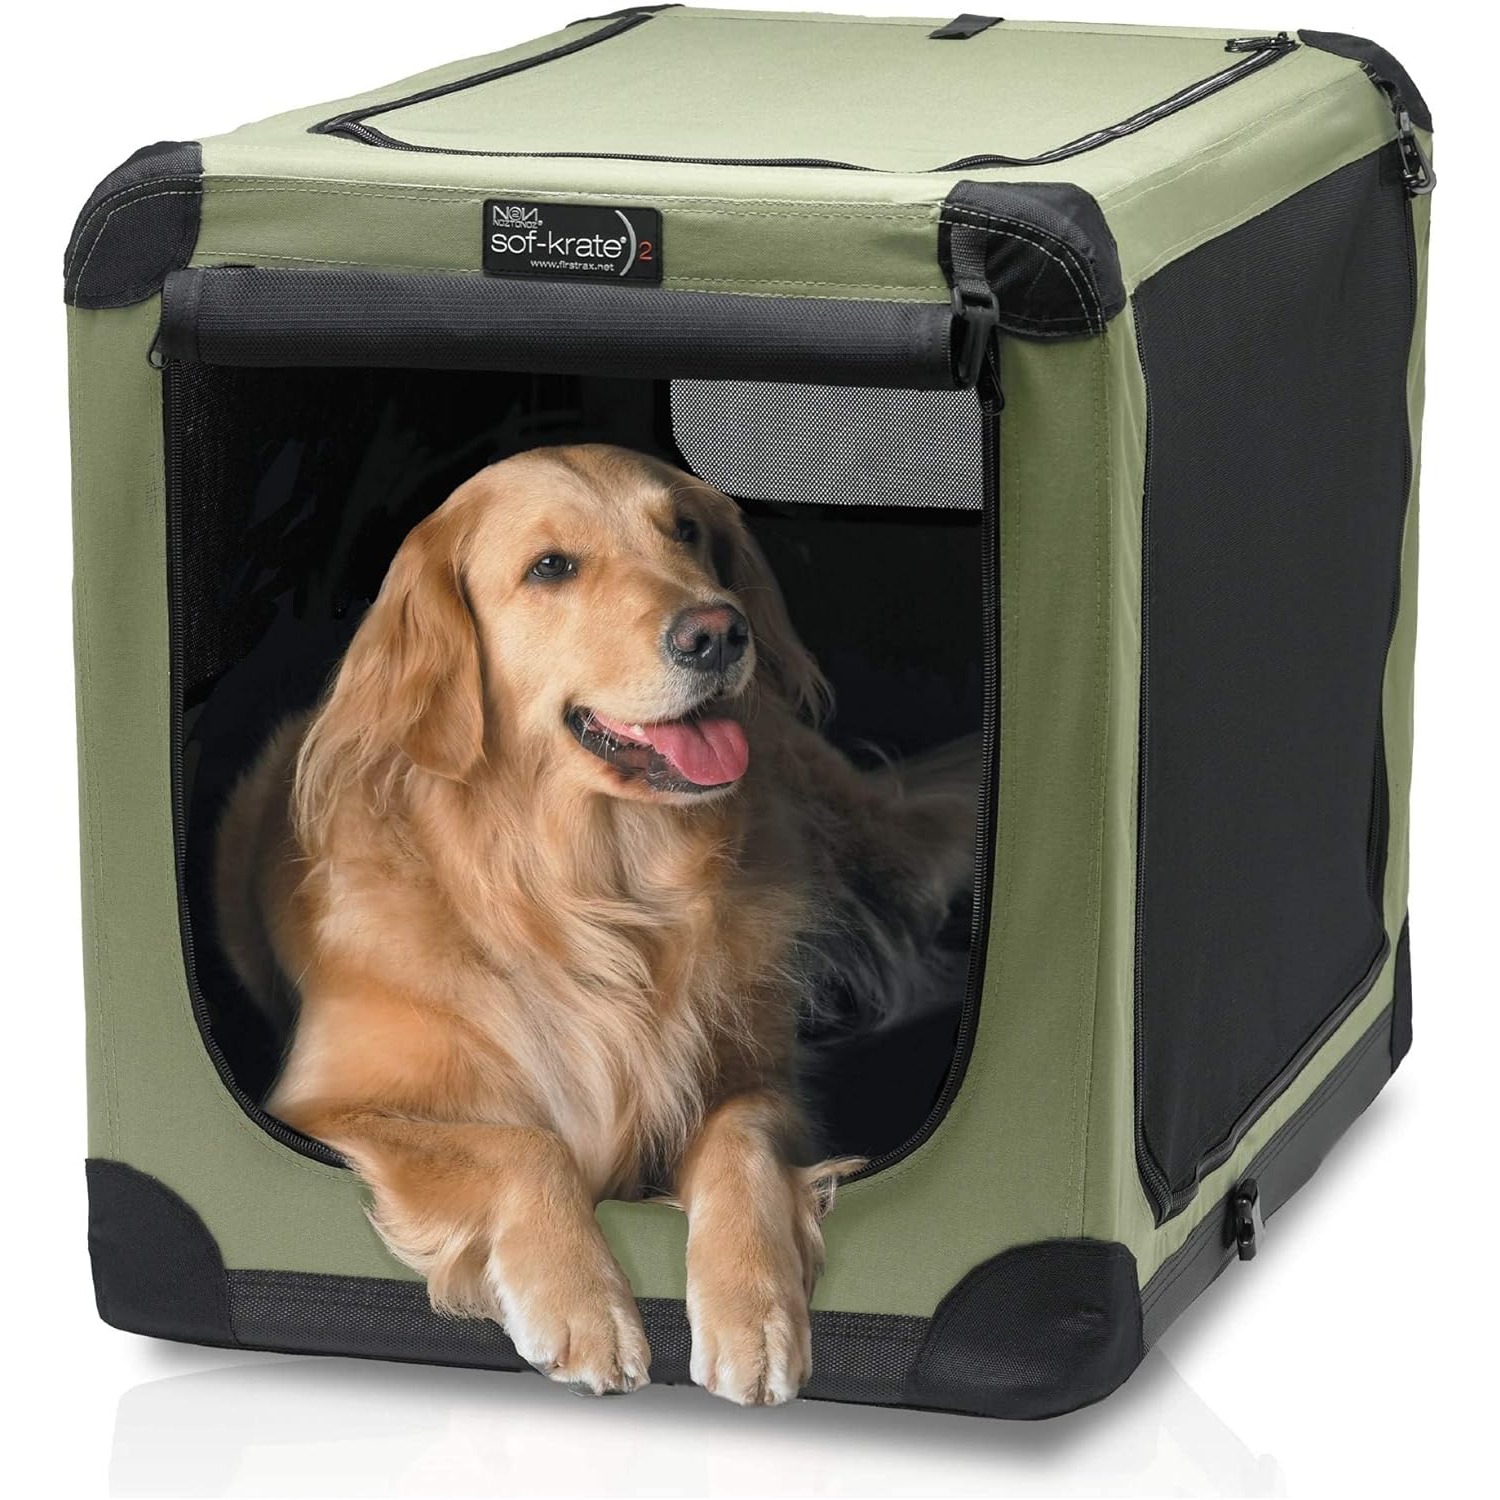 Noz2Noz Soft-Krater Crate for Pets